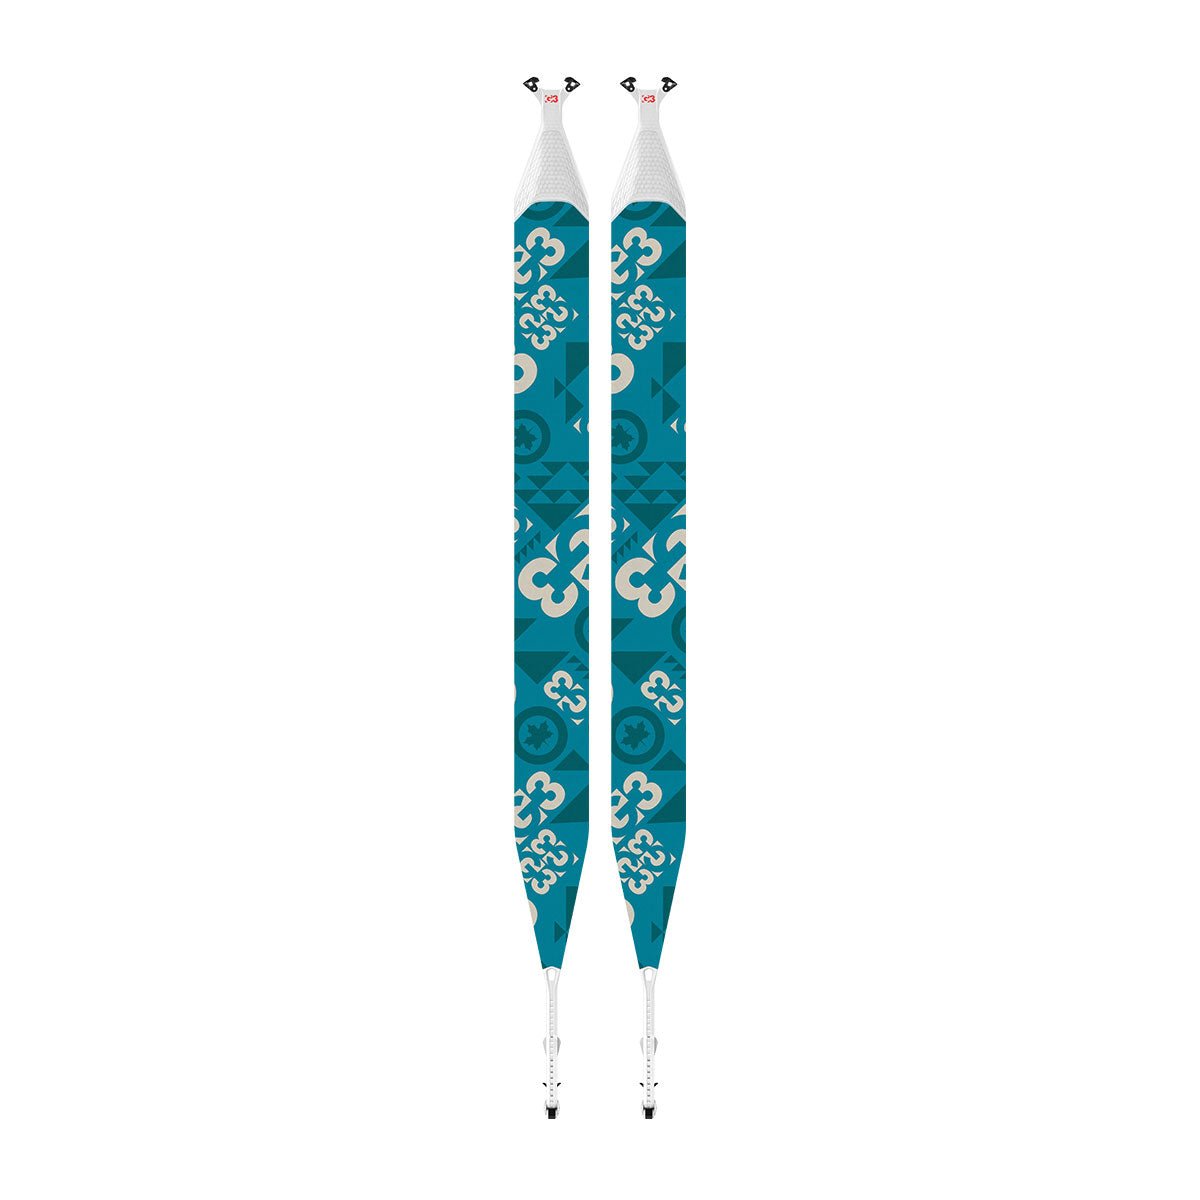 ALPINIST+ GLIDE Climbing Skins - G3 Store [CAD] – G3 Store Canada